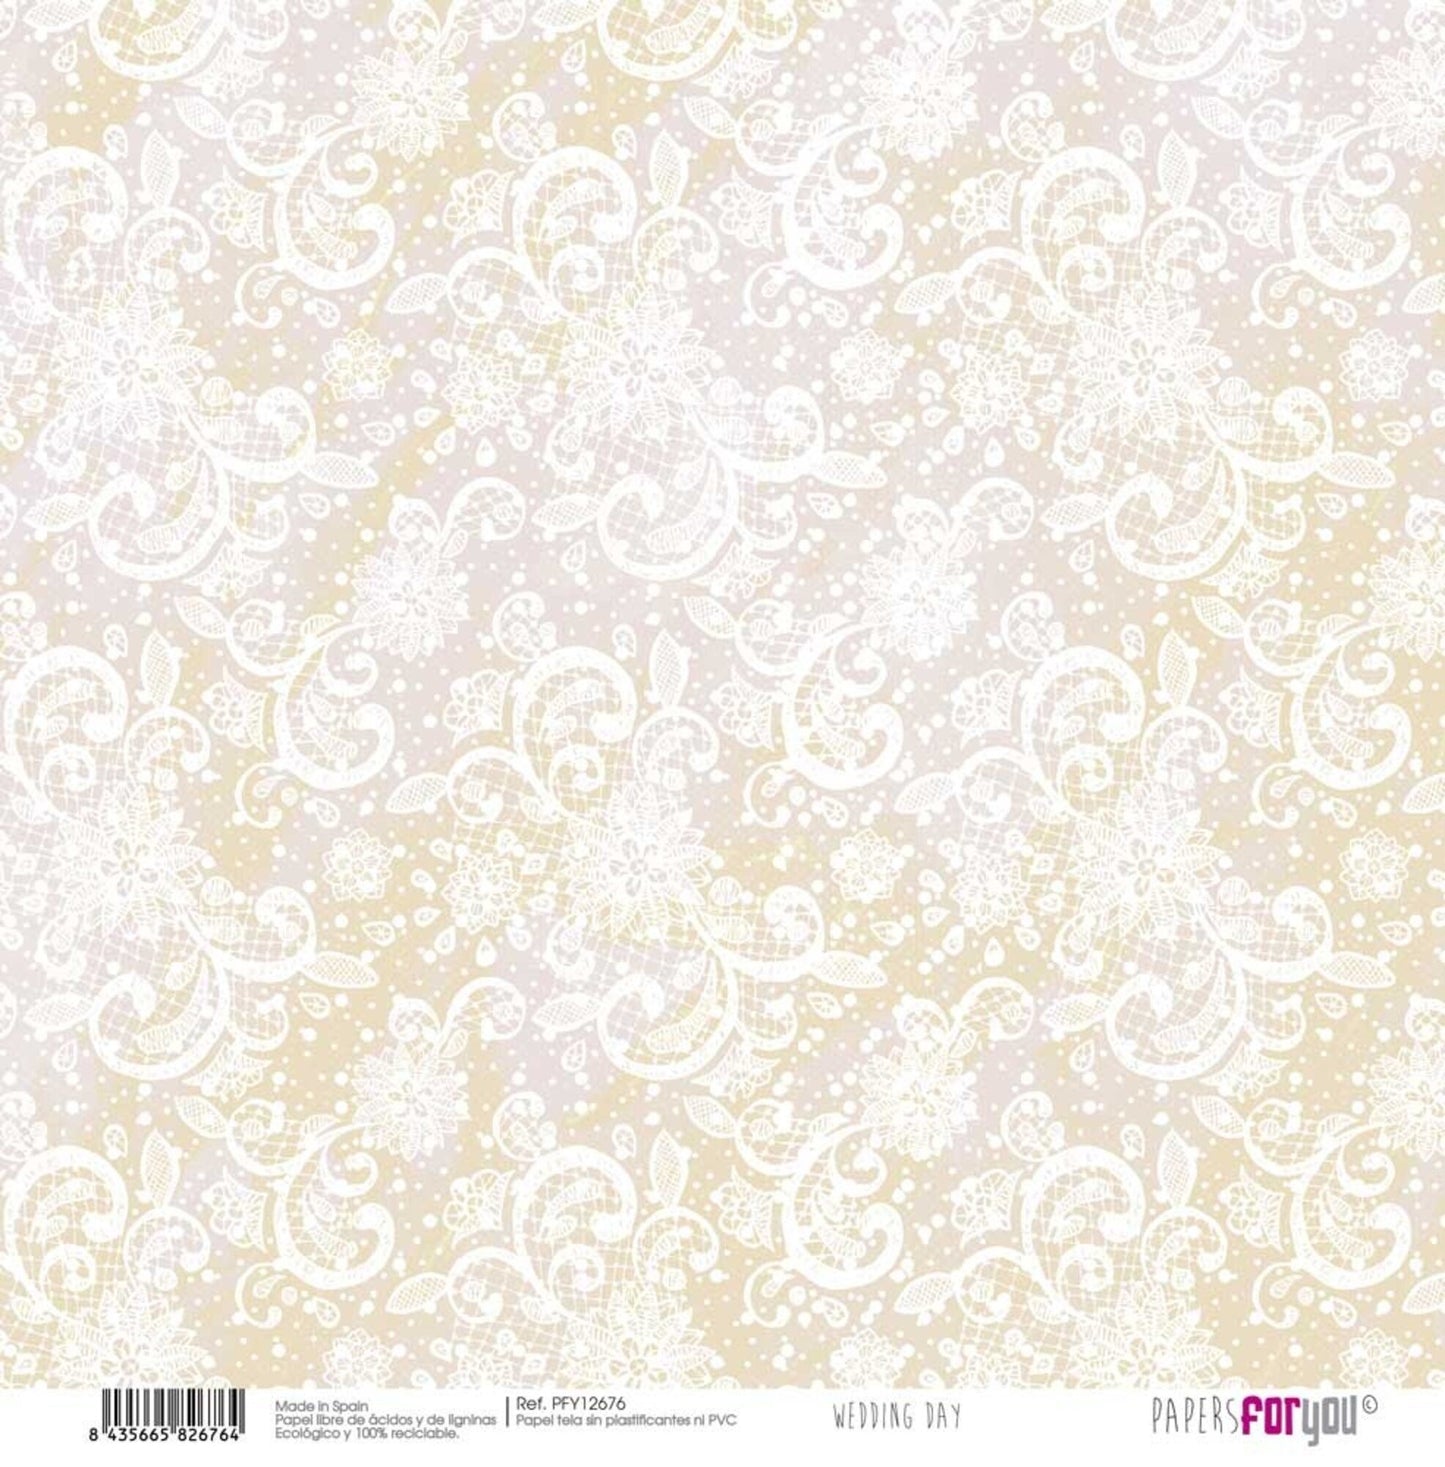 Papers For You Wedding Day Canvas Scrap Pack (8pcs) (PFY-12675)